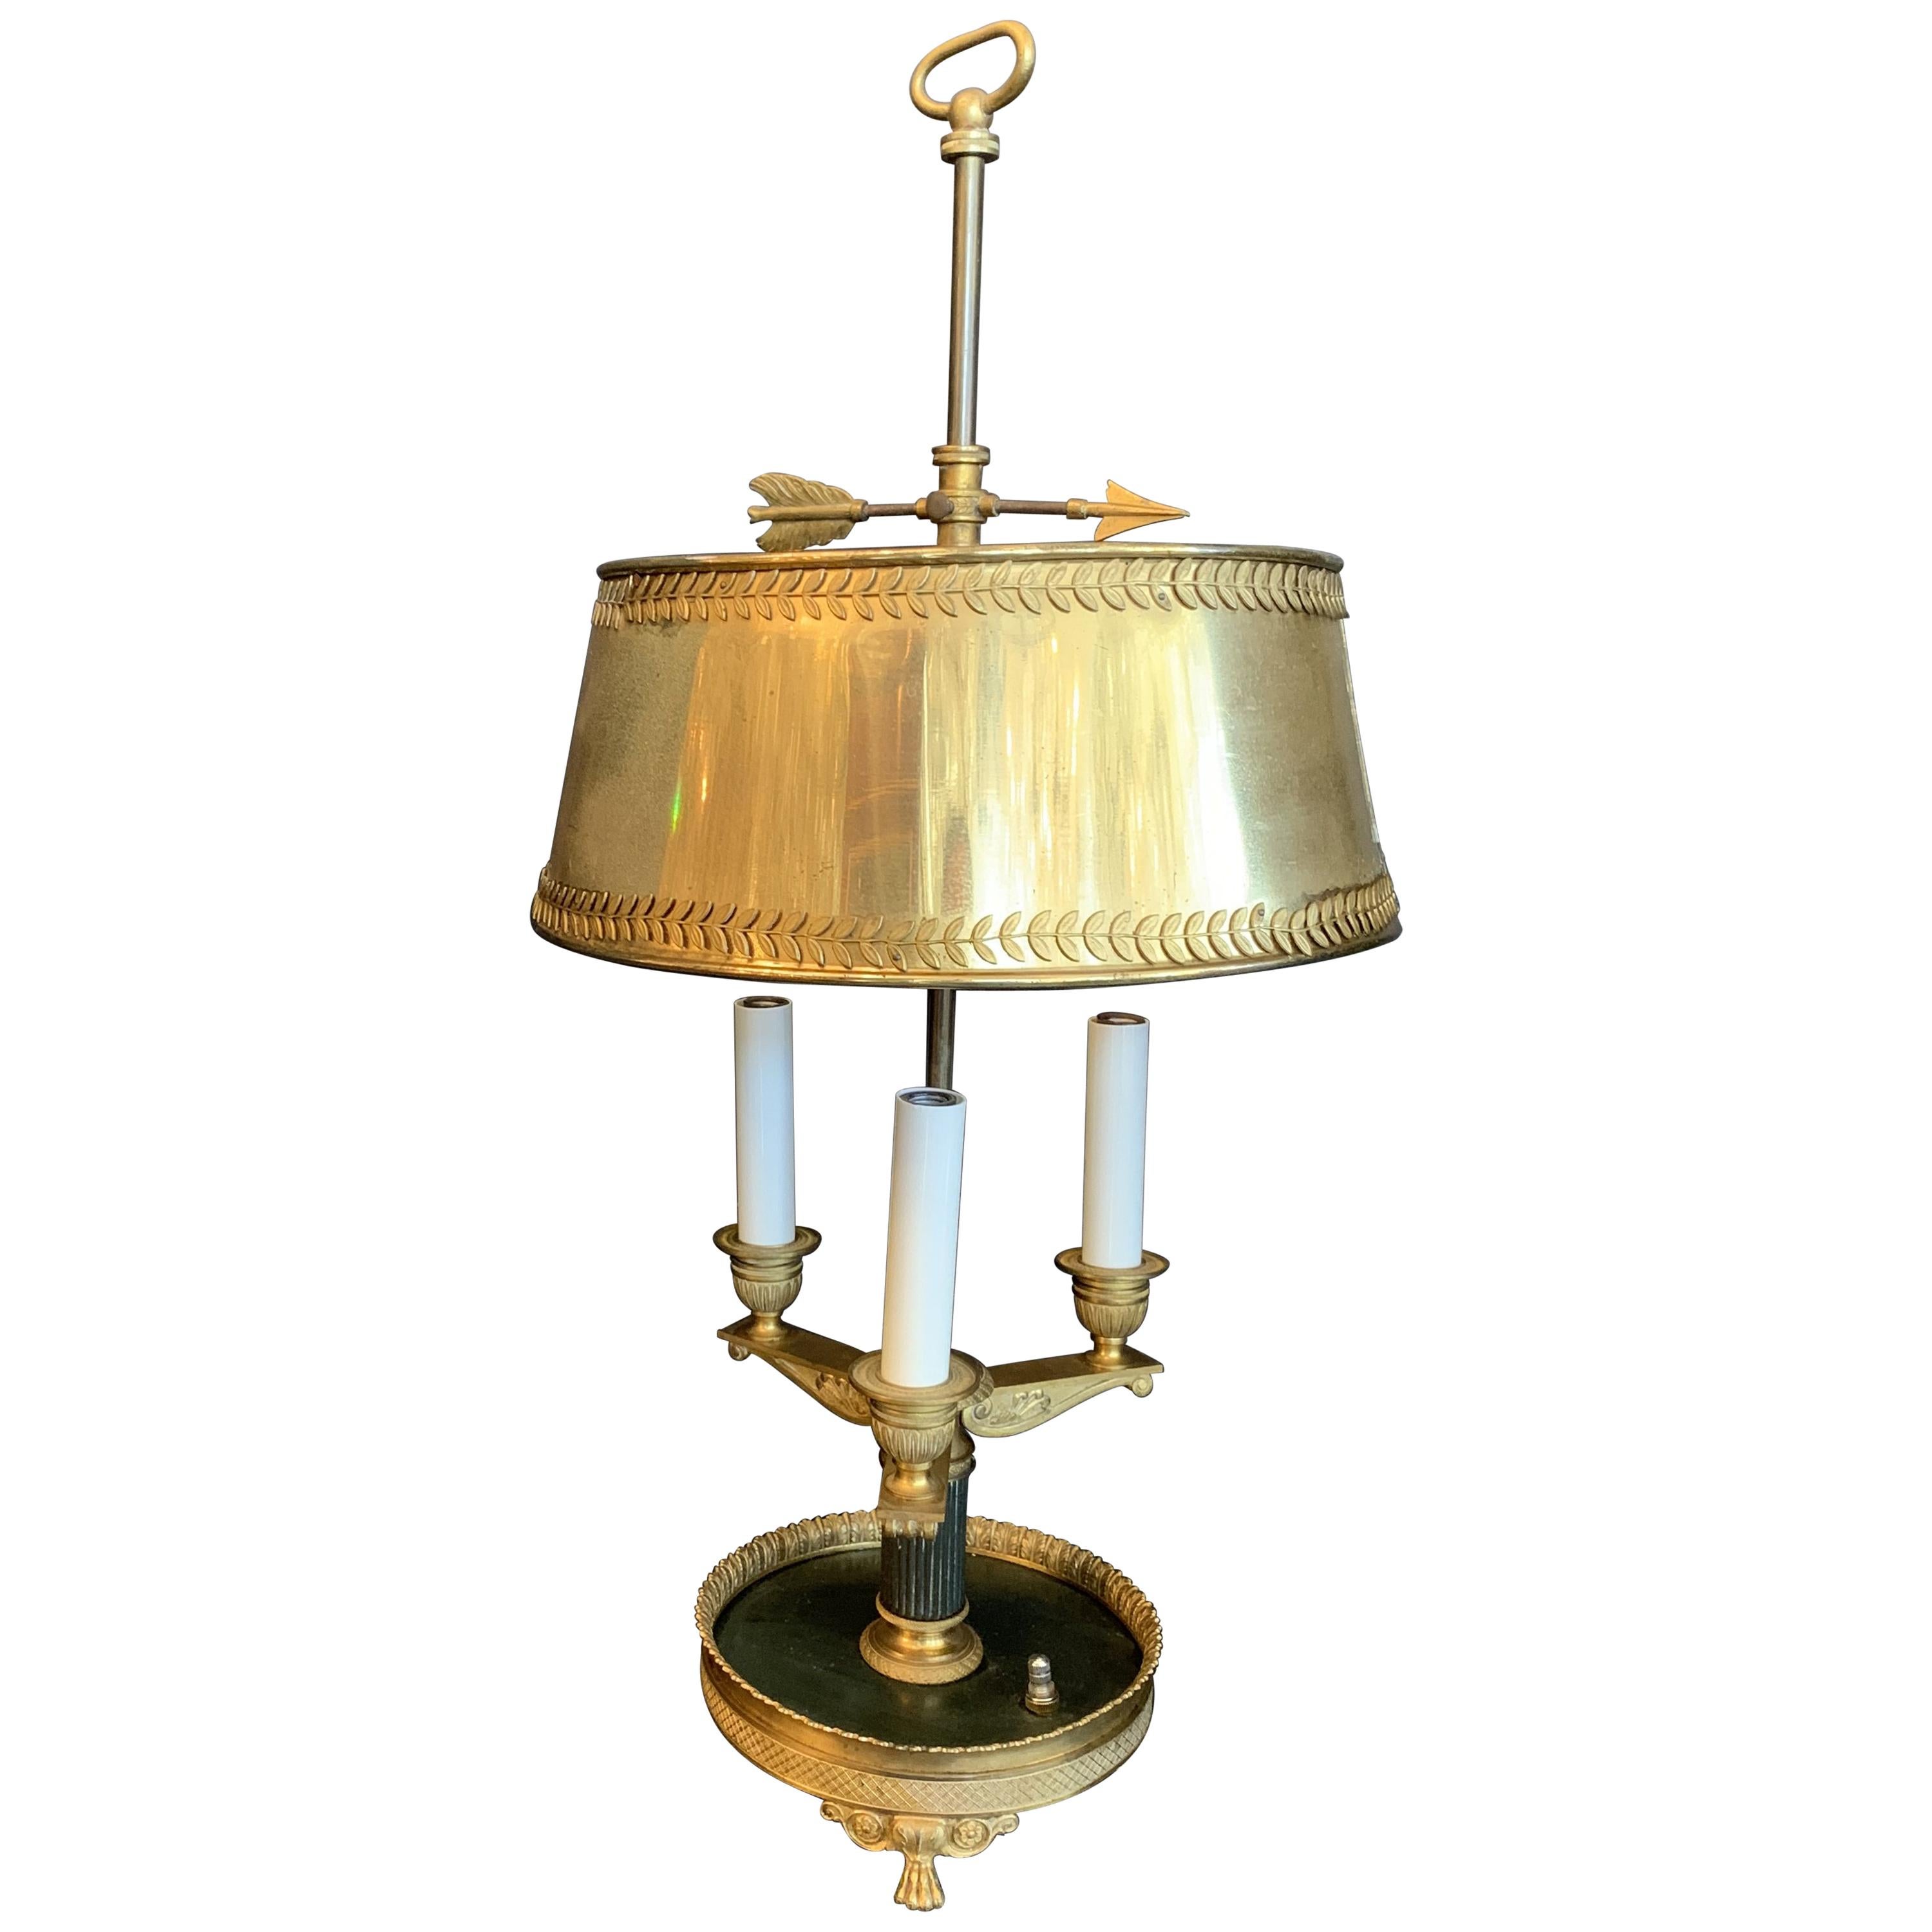 Wonderful French Empire Neoclassical Regency Bronze Patinated Bouillotte Lamp